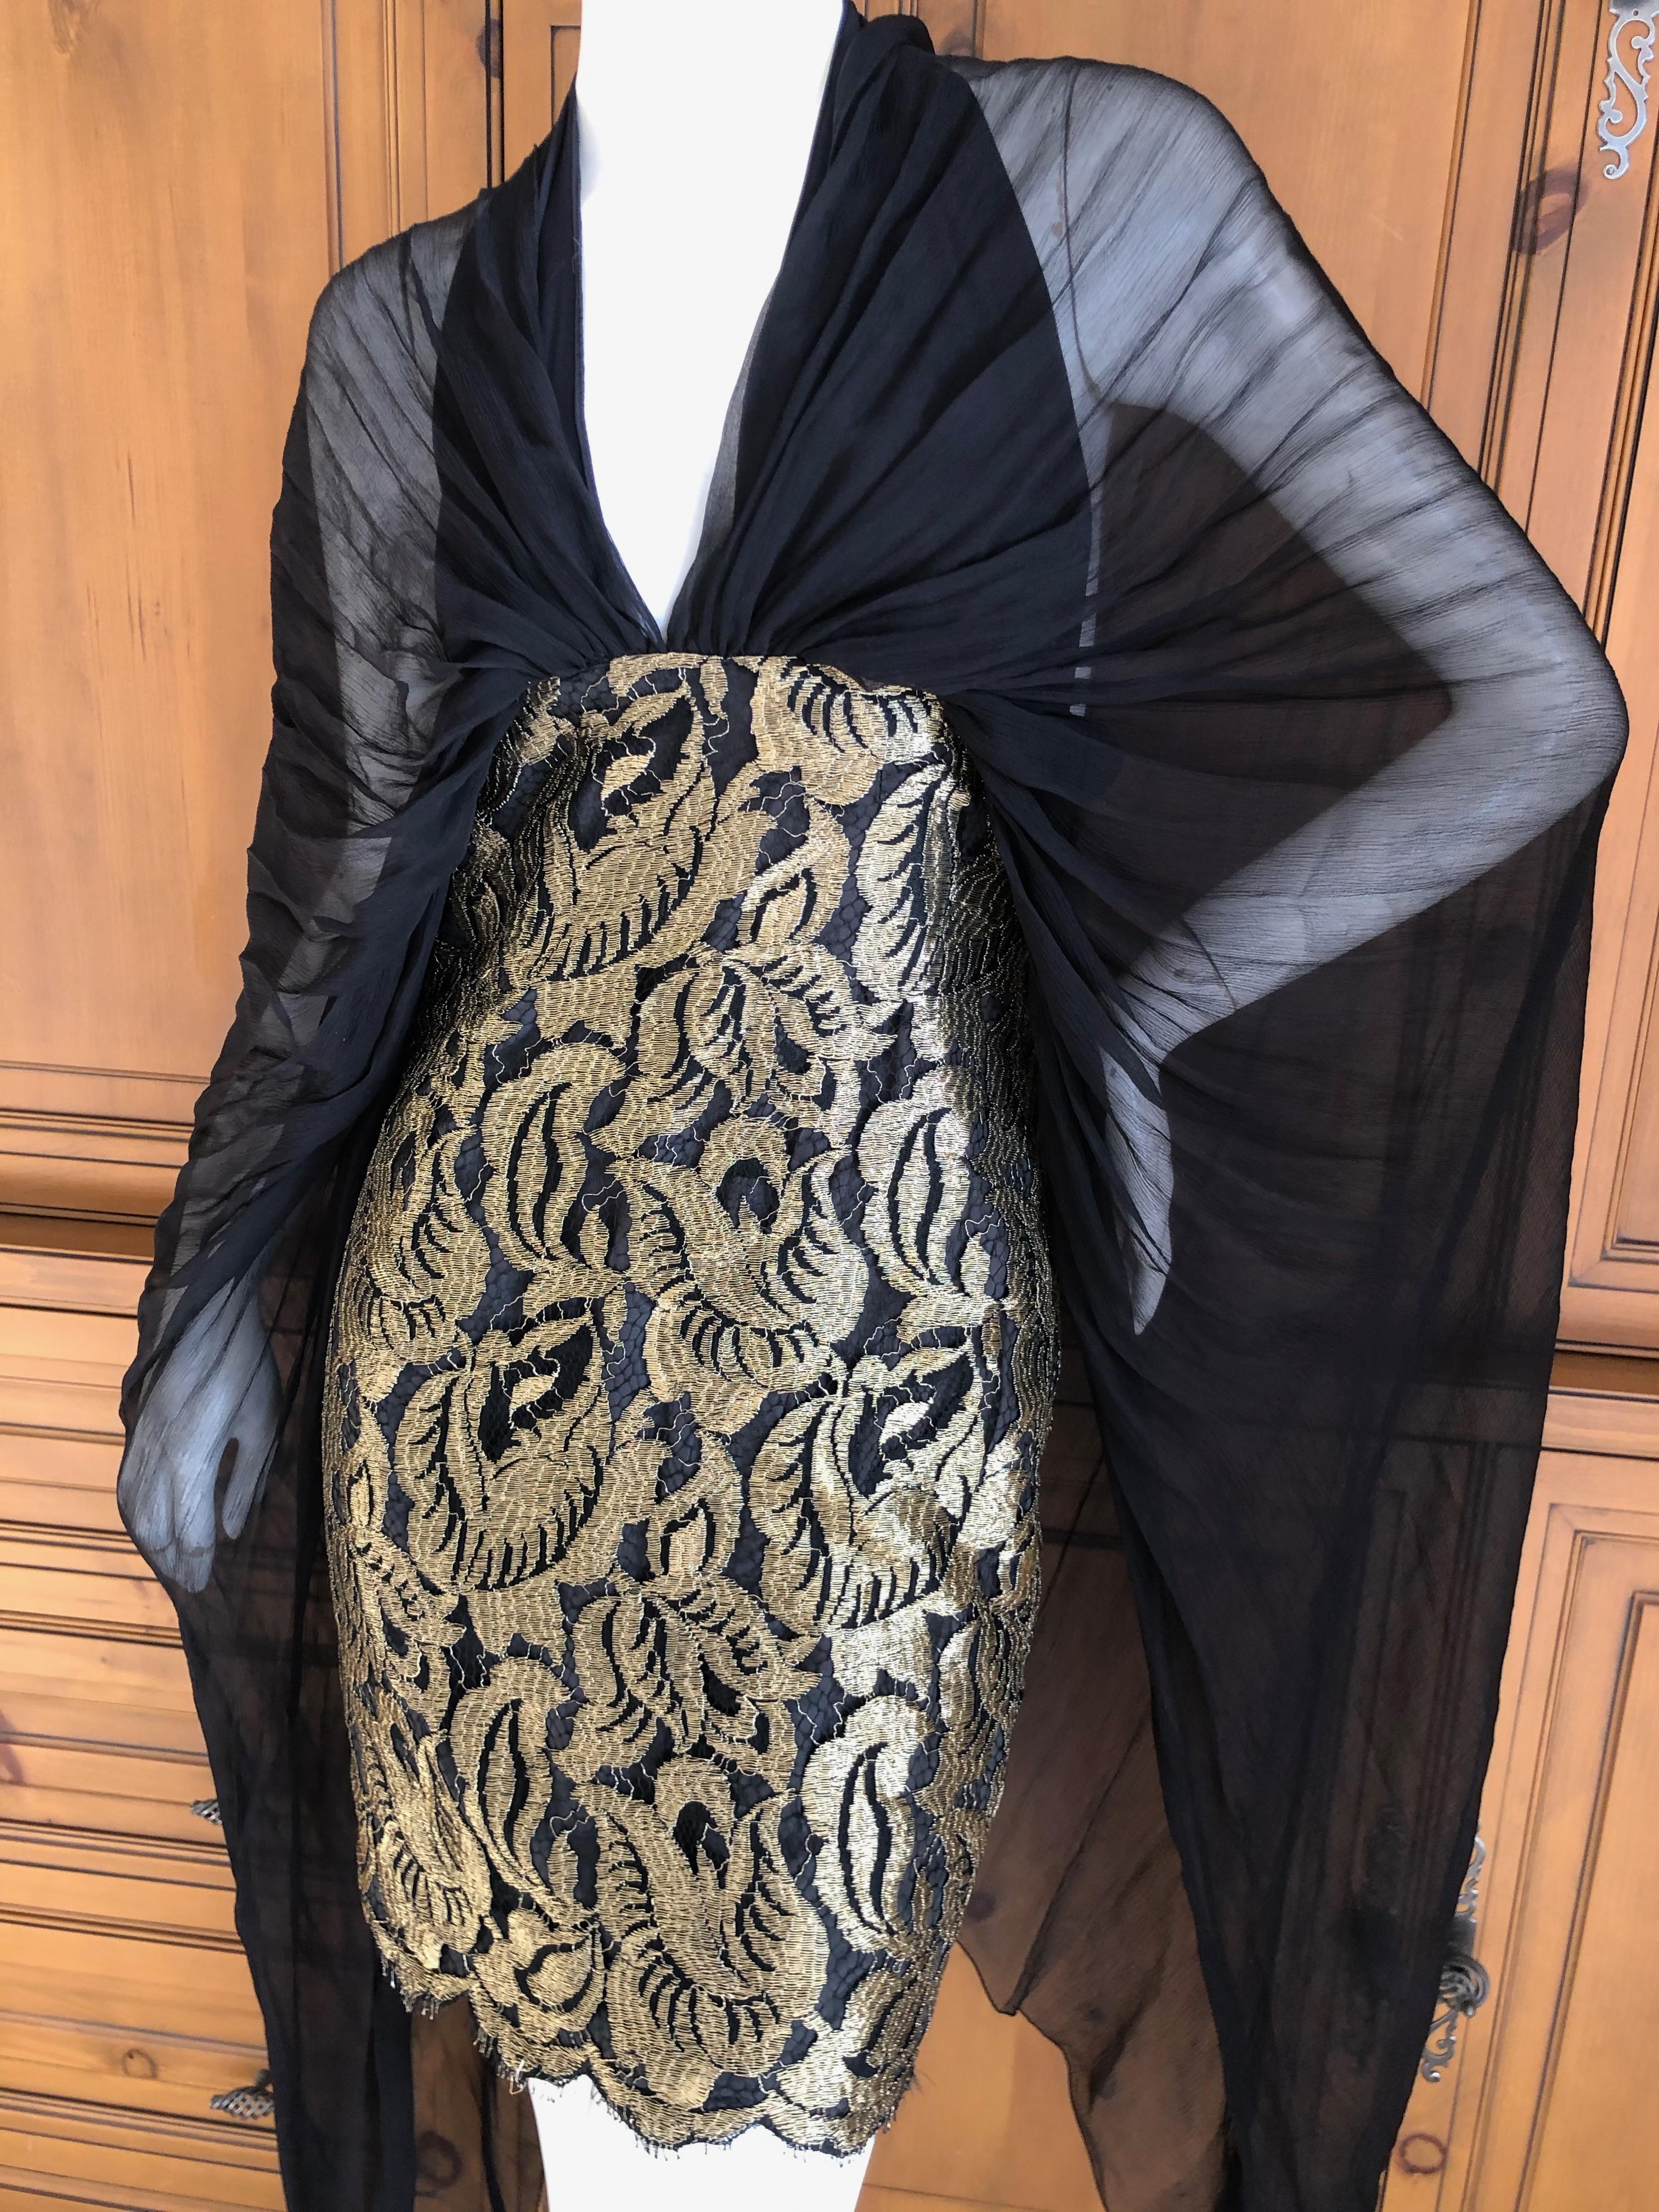 Christian Lacroix Vintage Sheer Black and Gold Lace Cocktail Dress For Sale 4